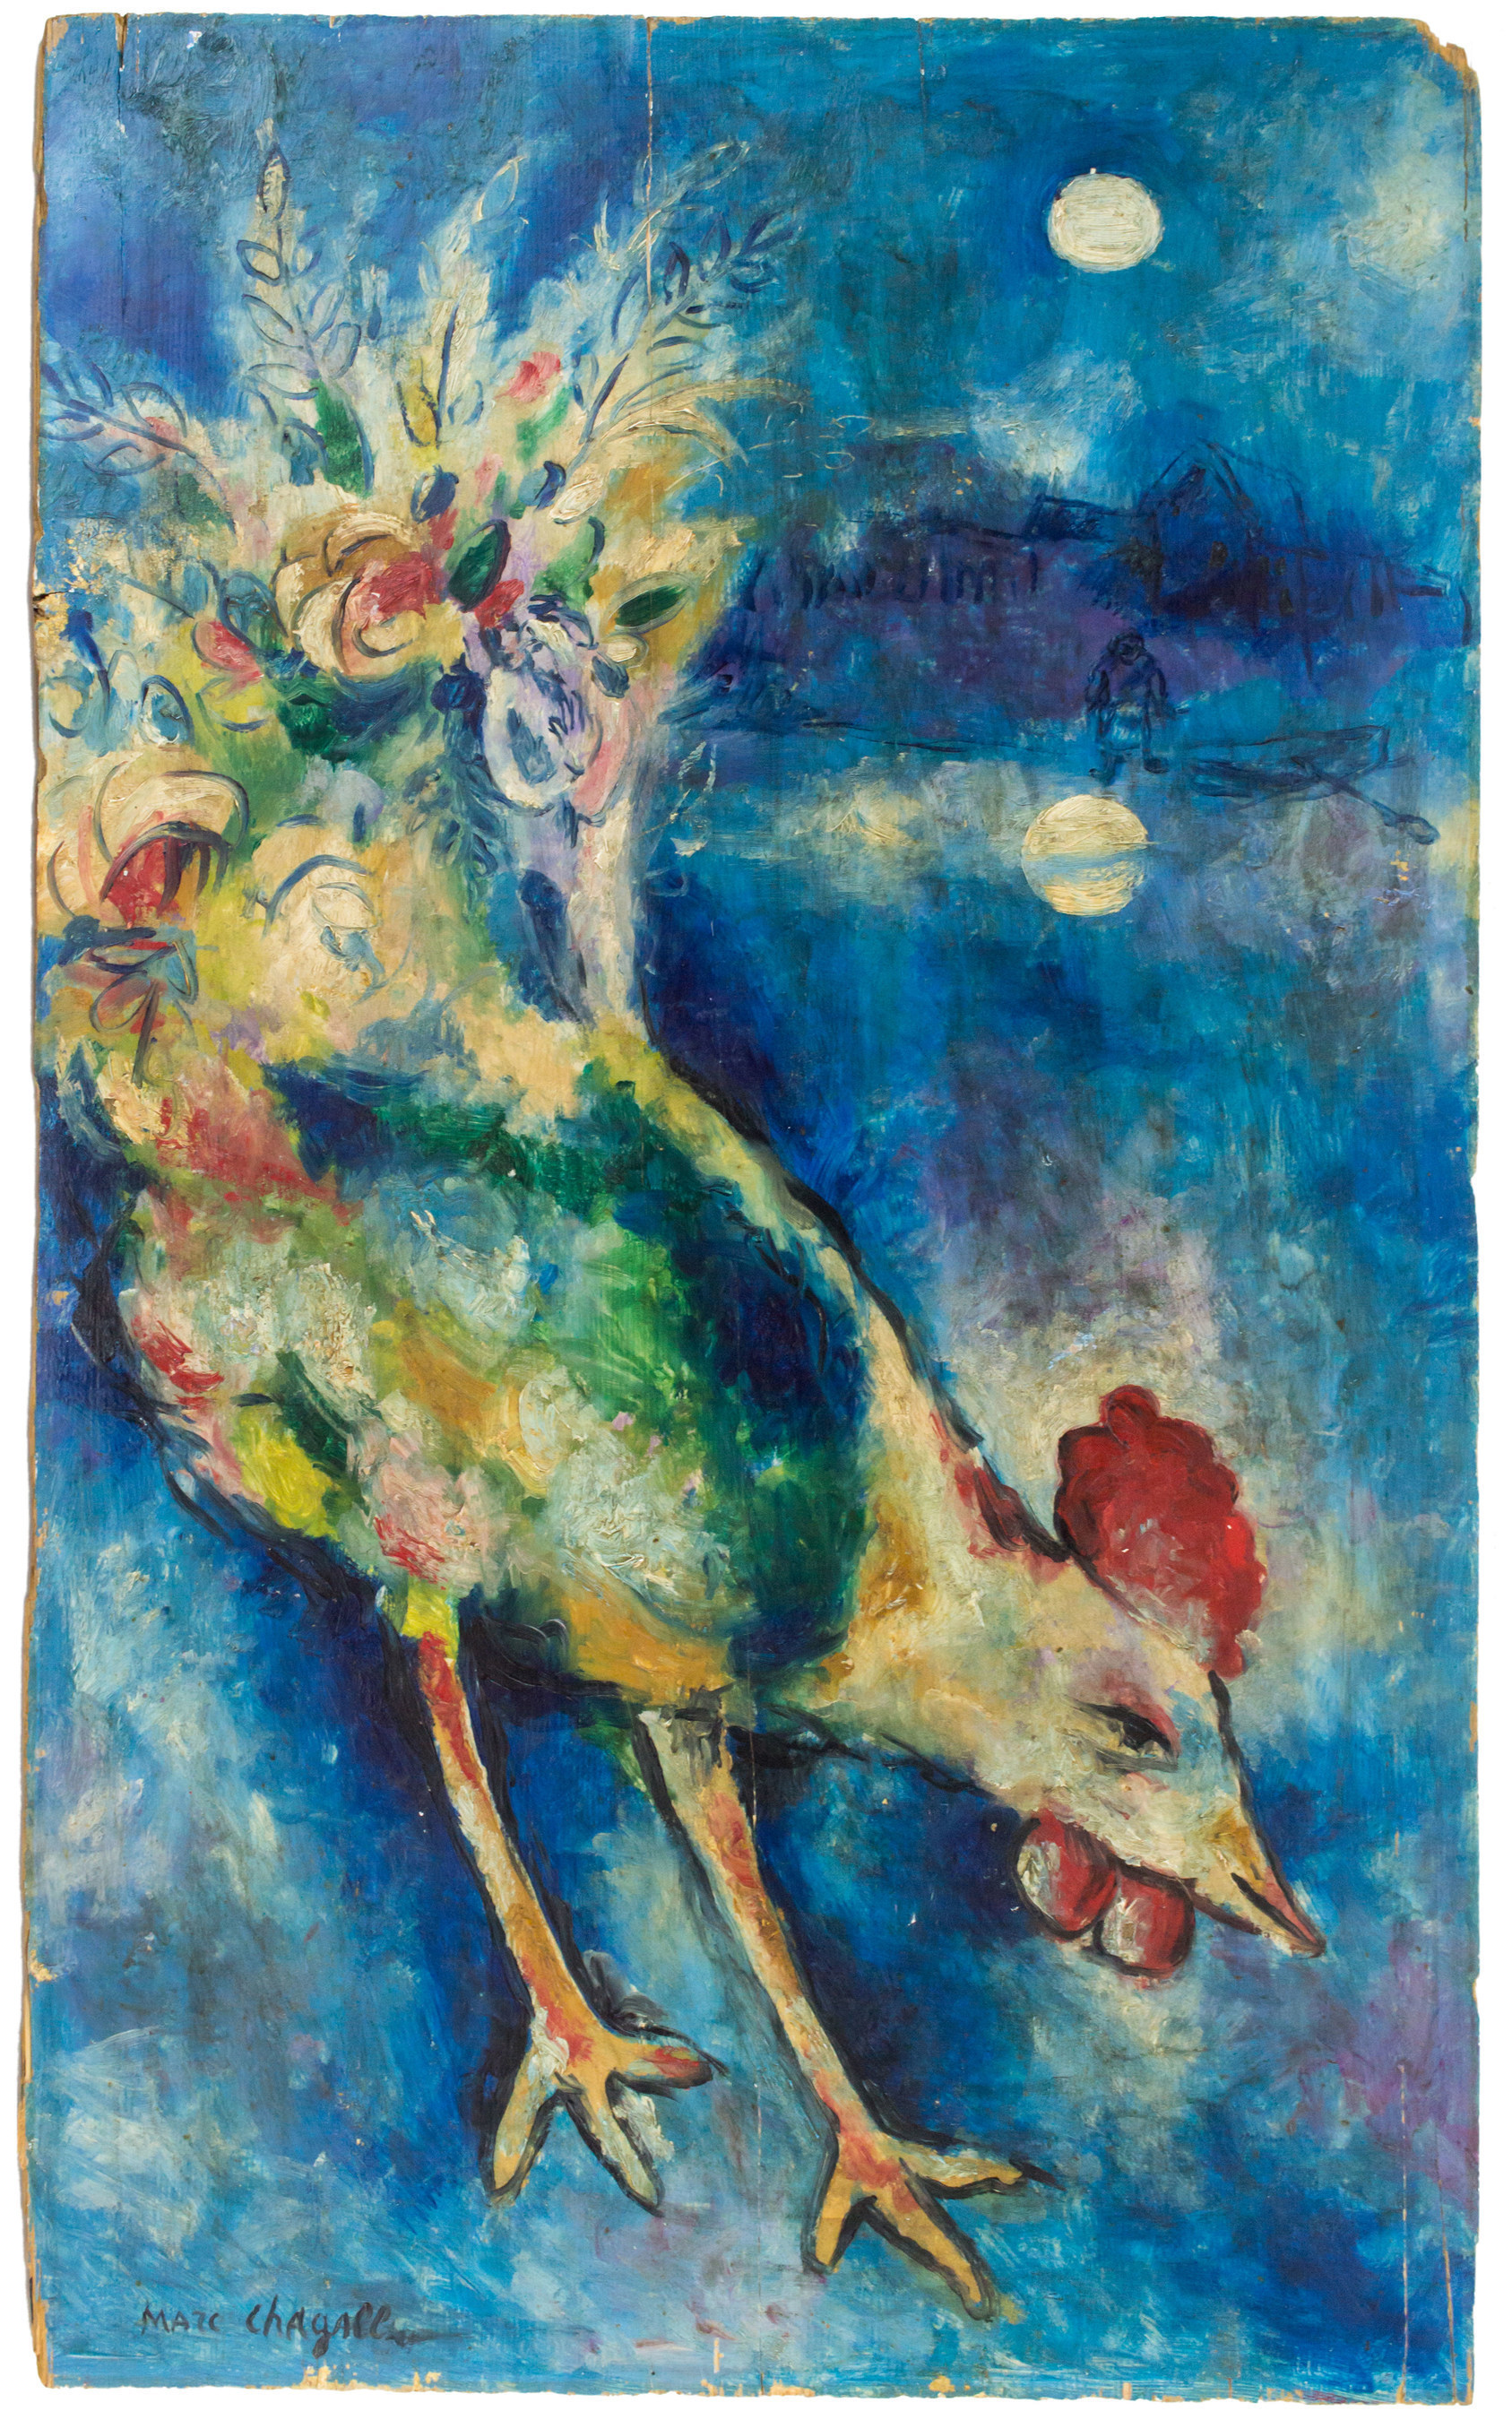 A Marc Chagall cockerel oil on board estimated at more than $1 million is in J. Levine Auction & Appraisal's Fall Catalog Auction on Thursday, October 29 in Scottsdale, Arizona. www.jlevines.com